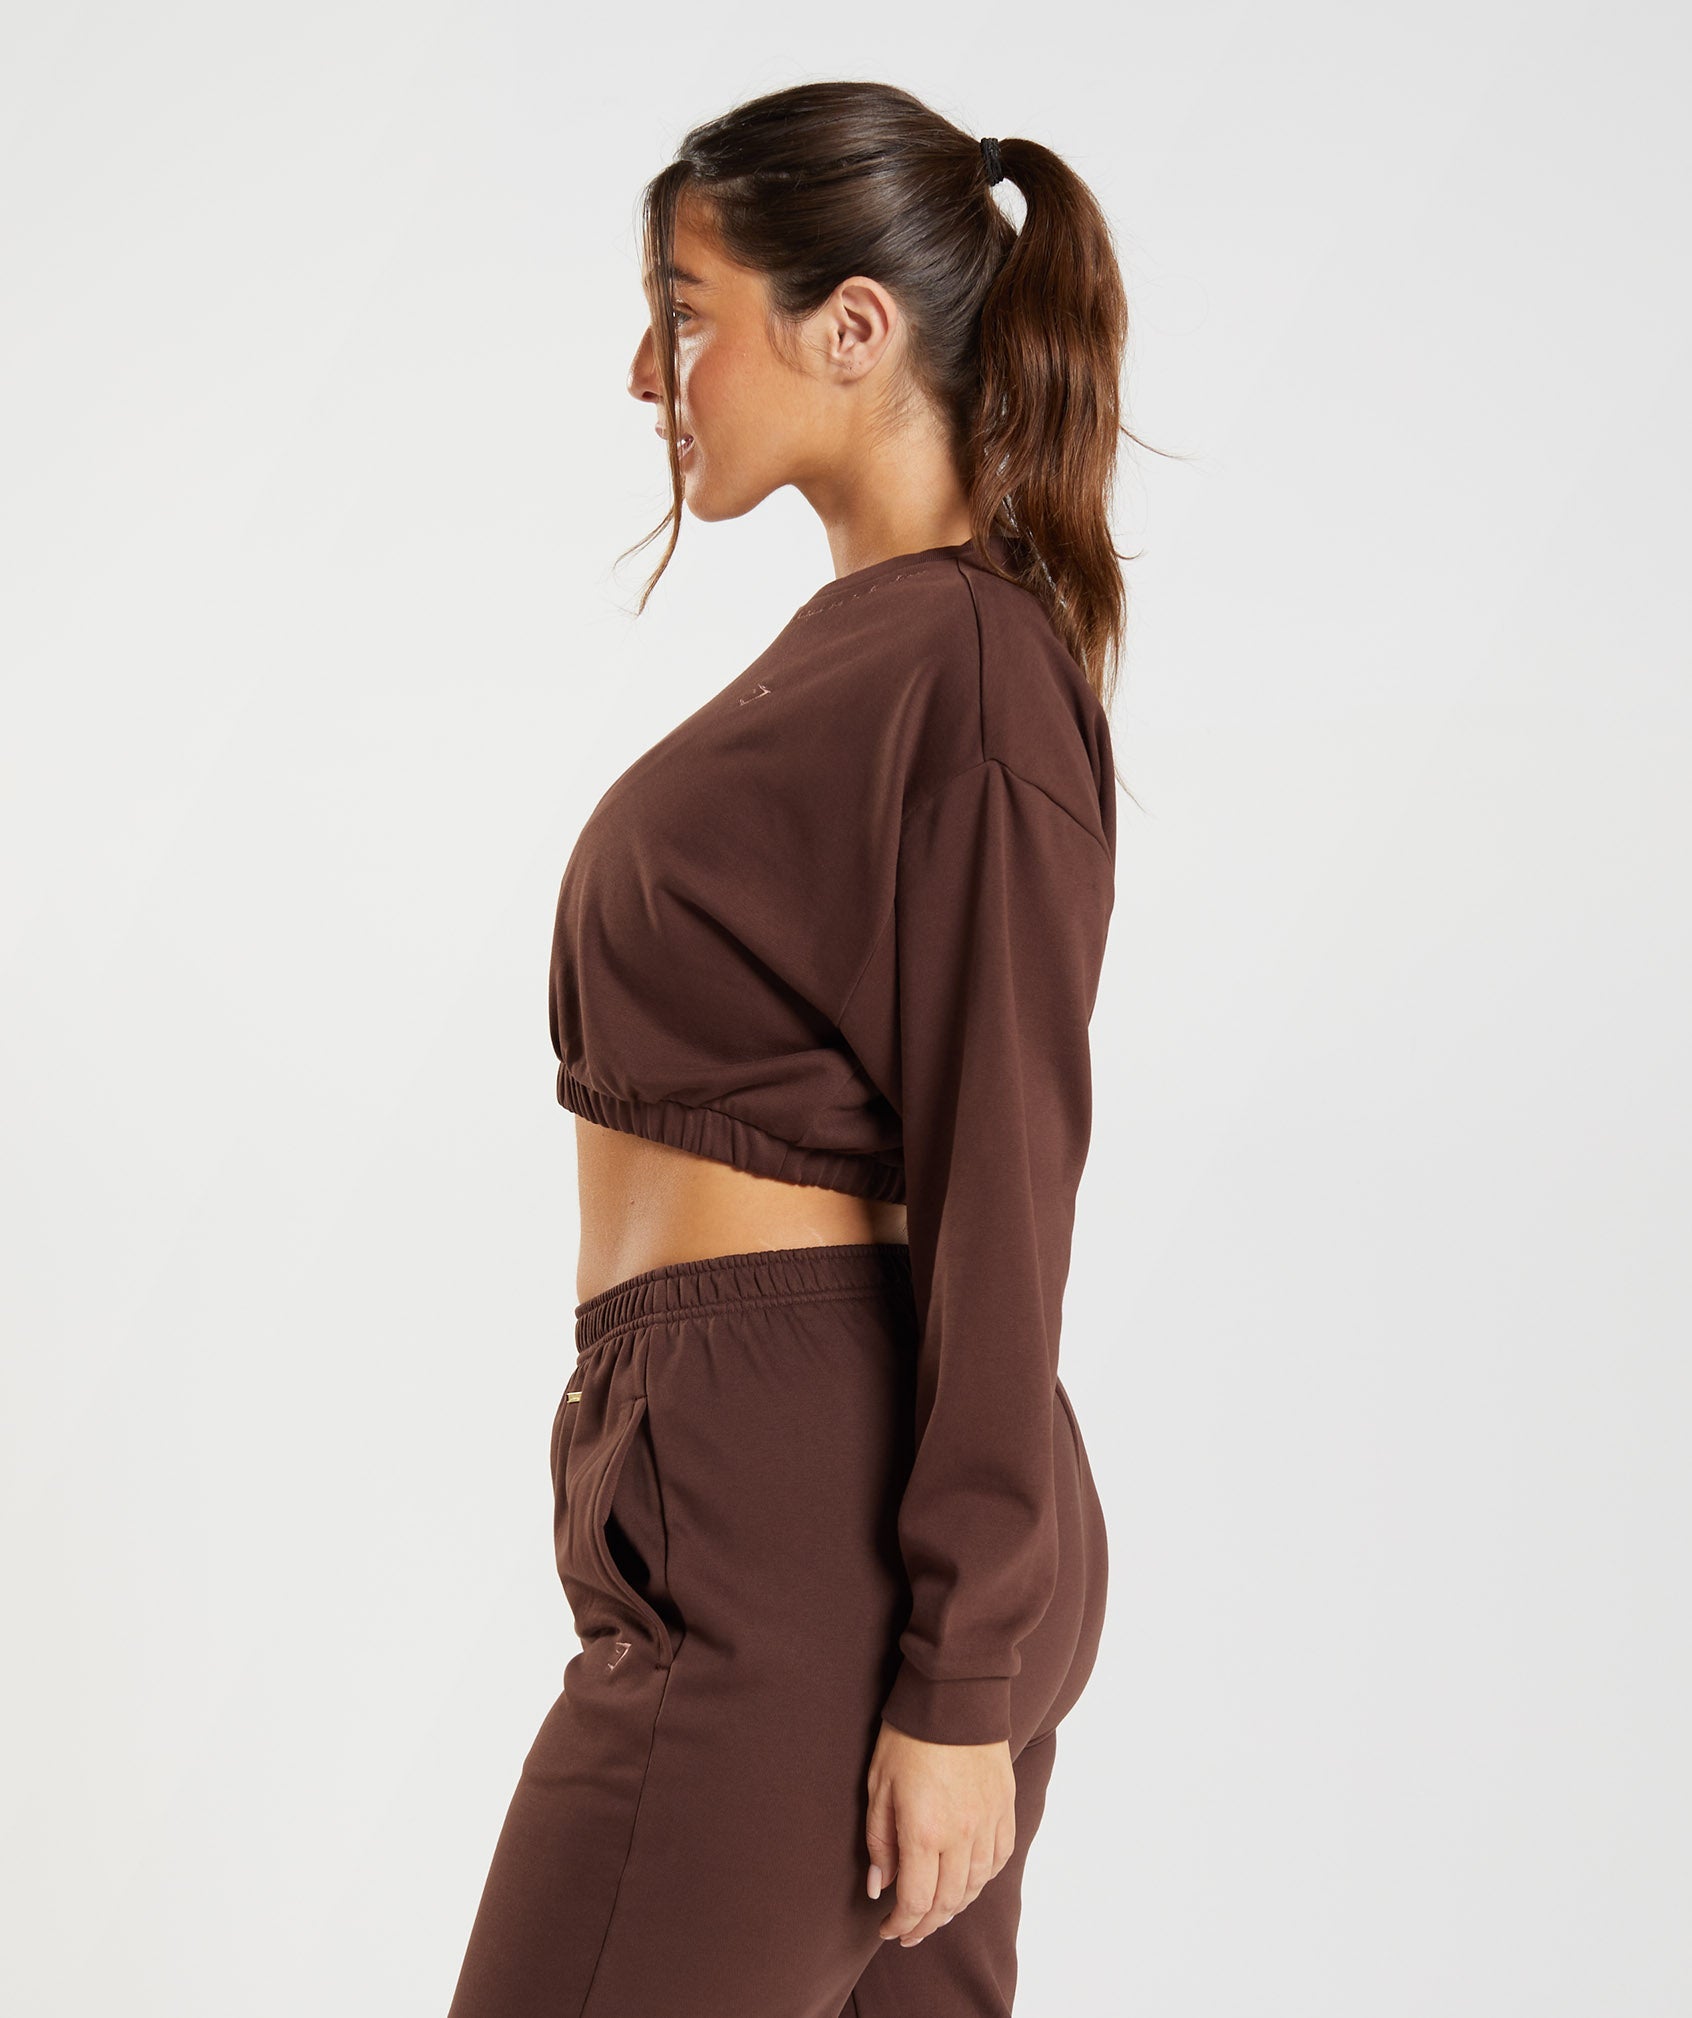 Whitney Cropped Pullover in Rekindle Brown - view 5